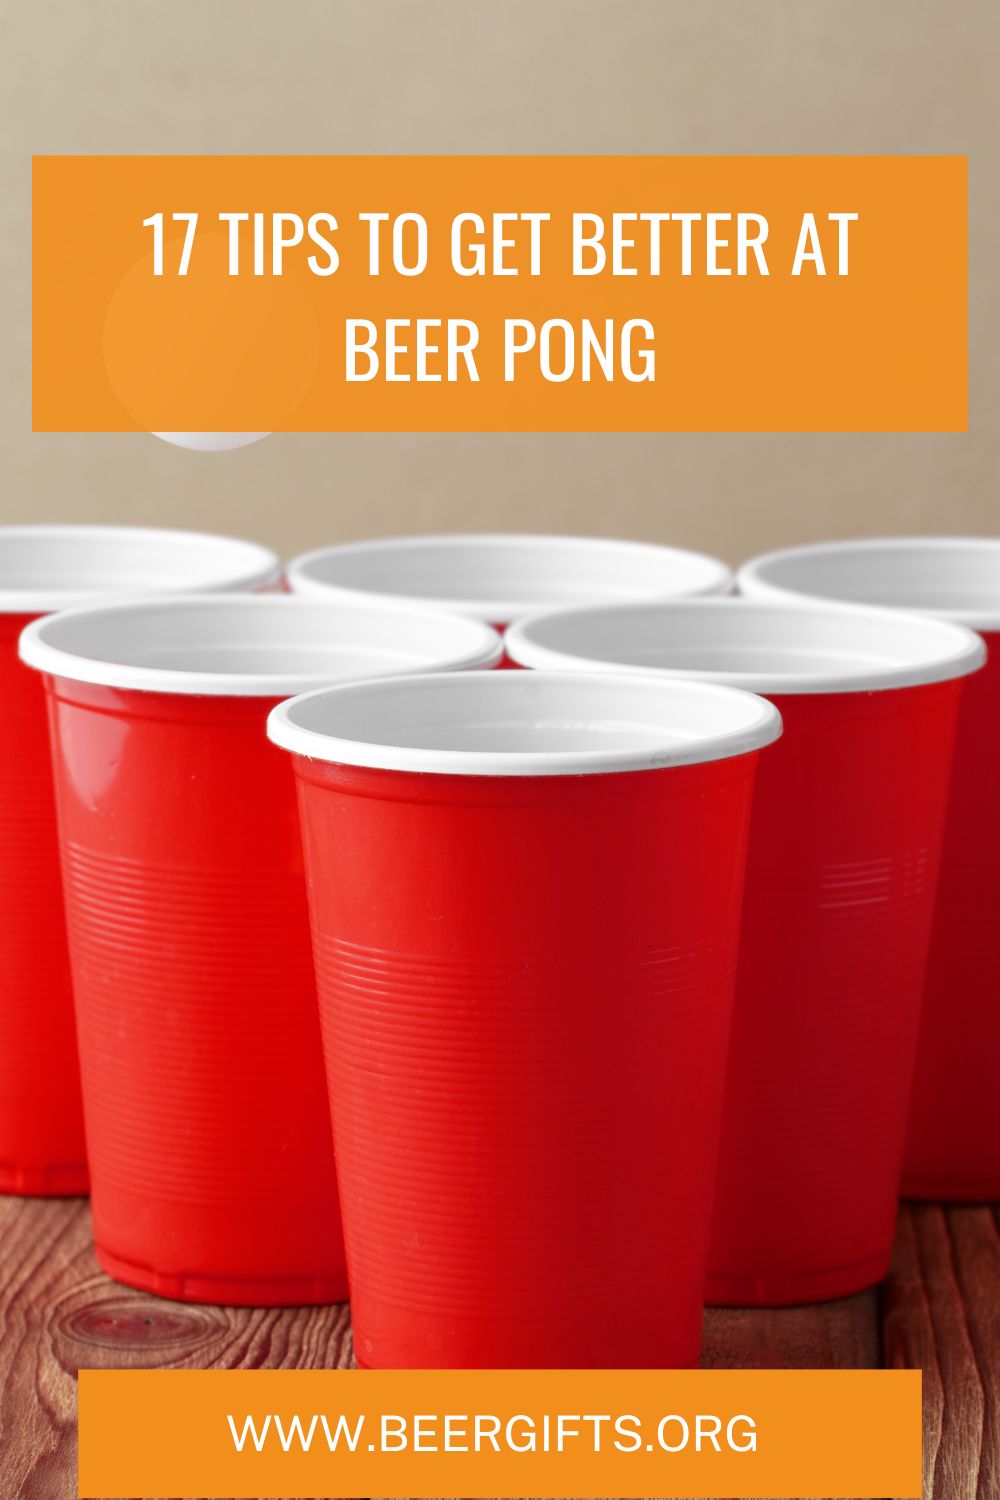 17 Tips To Get Better at Beer Pong1